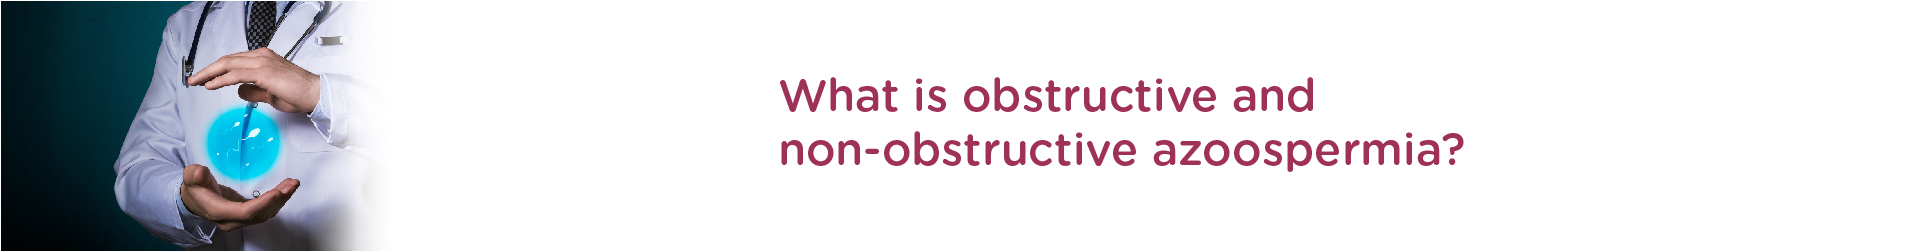 What is Obstructive and Non Obstructive Azoospermia?